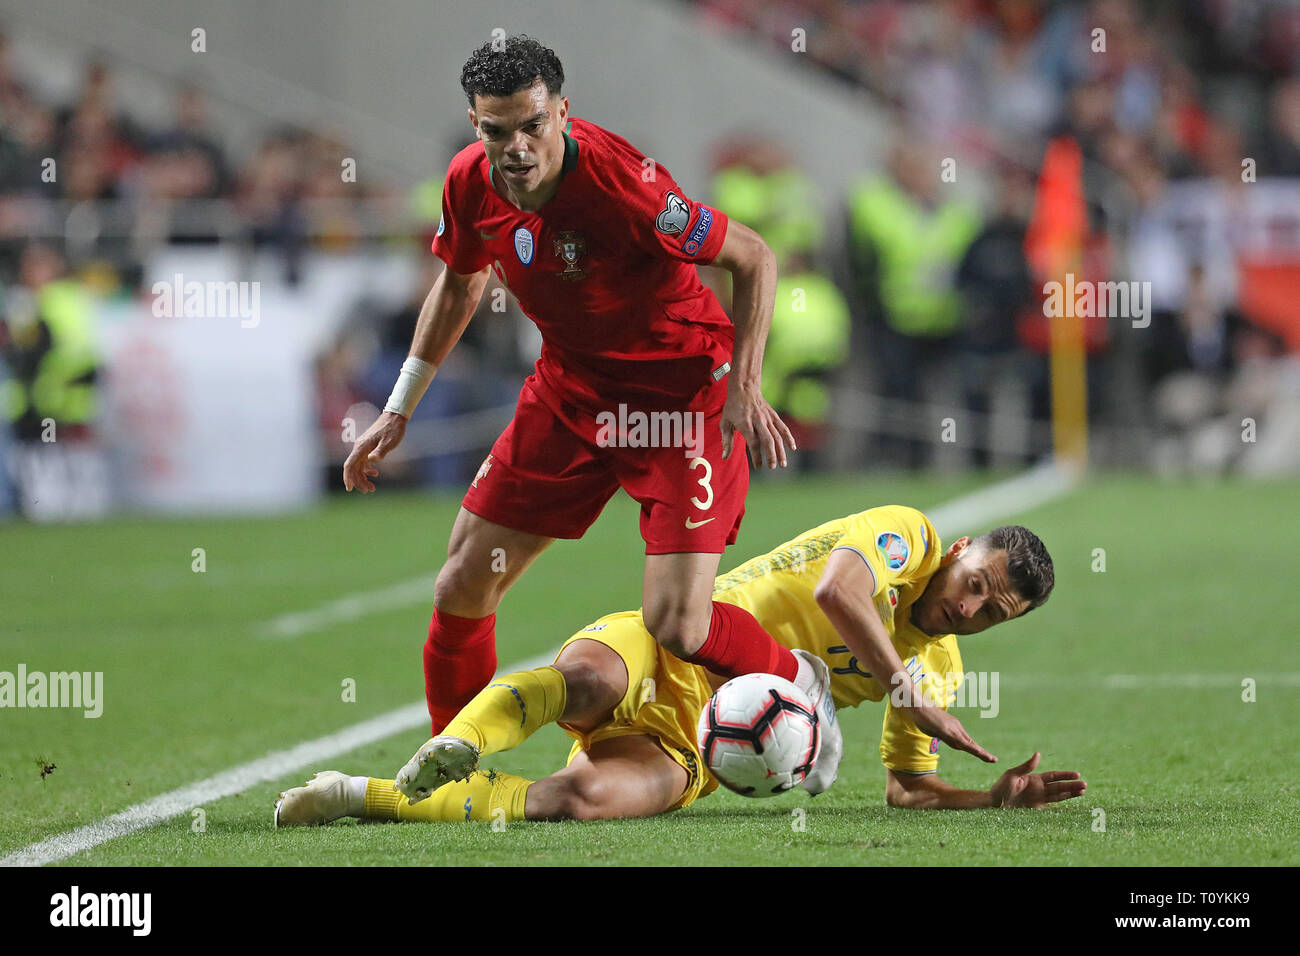 Pepe (Kepler Laveran de Lima Ferreira ComM) of Portugal (L) vies for the ball with Júnior Moraes of Ukraine (R) during the Qualifiers - Group B to Euro 2020 football match between Portugal vs Ukraine. (Final score: Portugal 0 - 0 Ukraine) Stock Photo